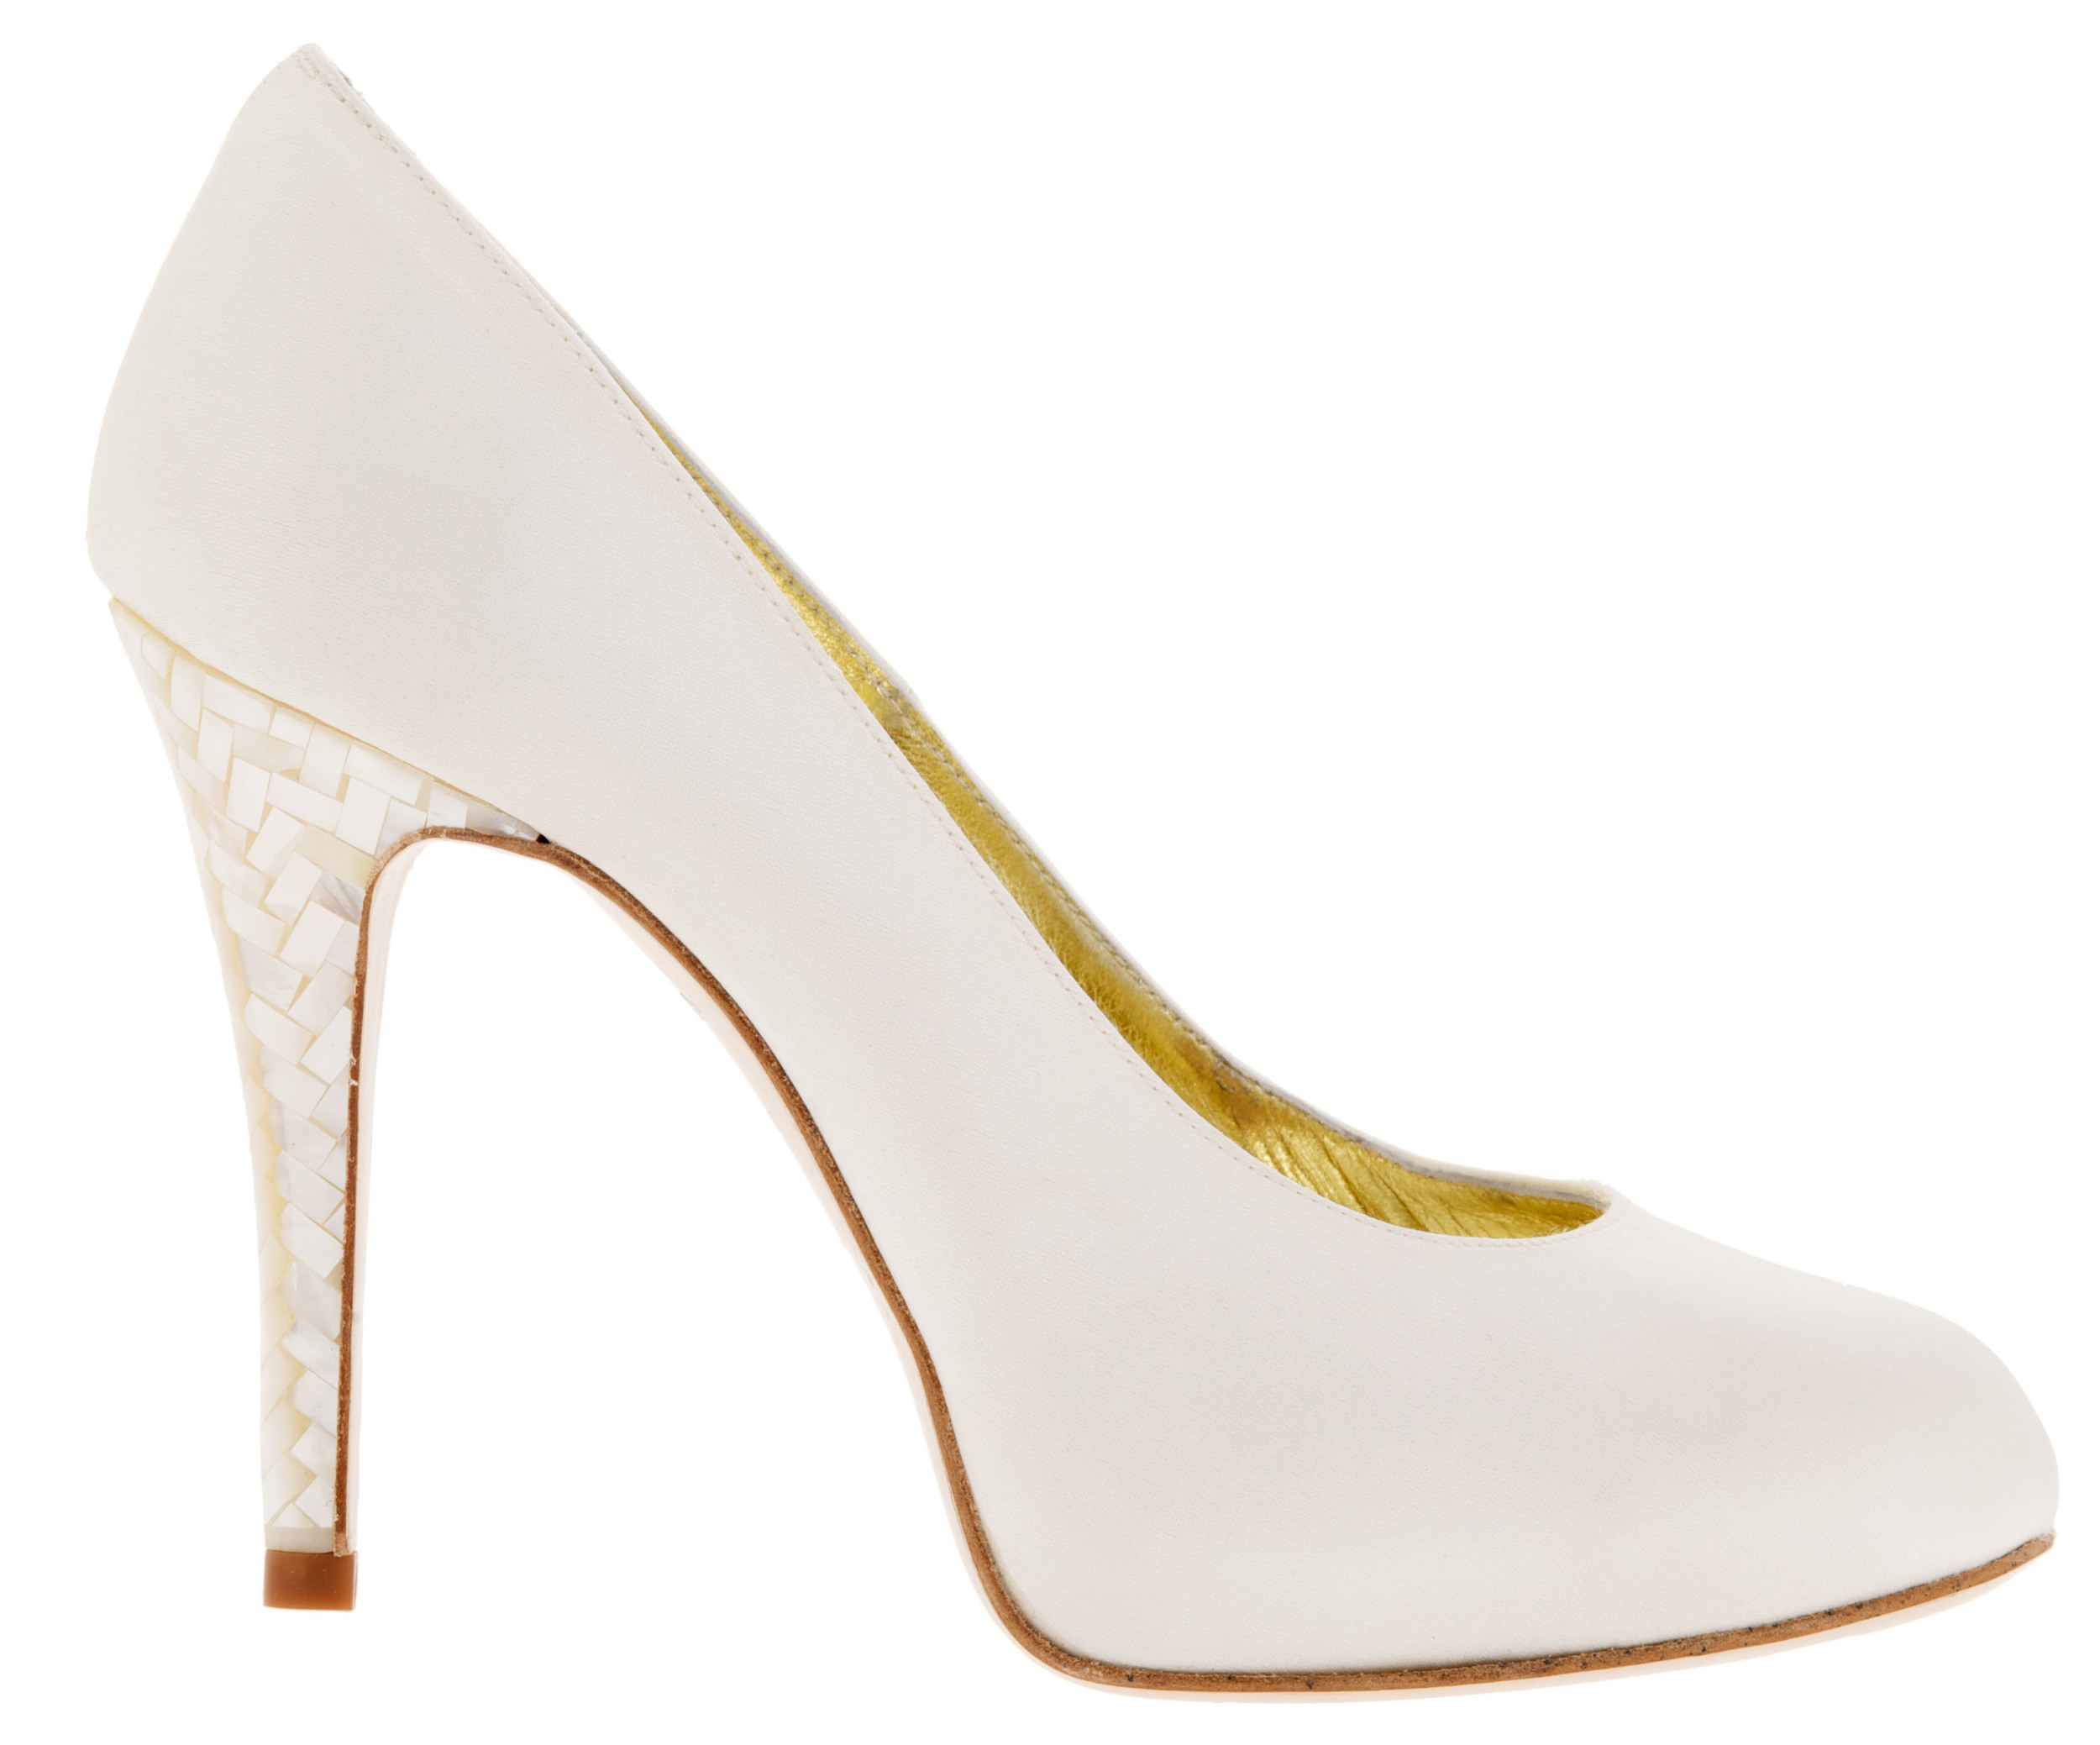 The Caira shoes, with Freya Rose's signature Mother of Pearl mosaic heel